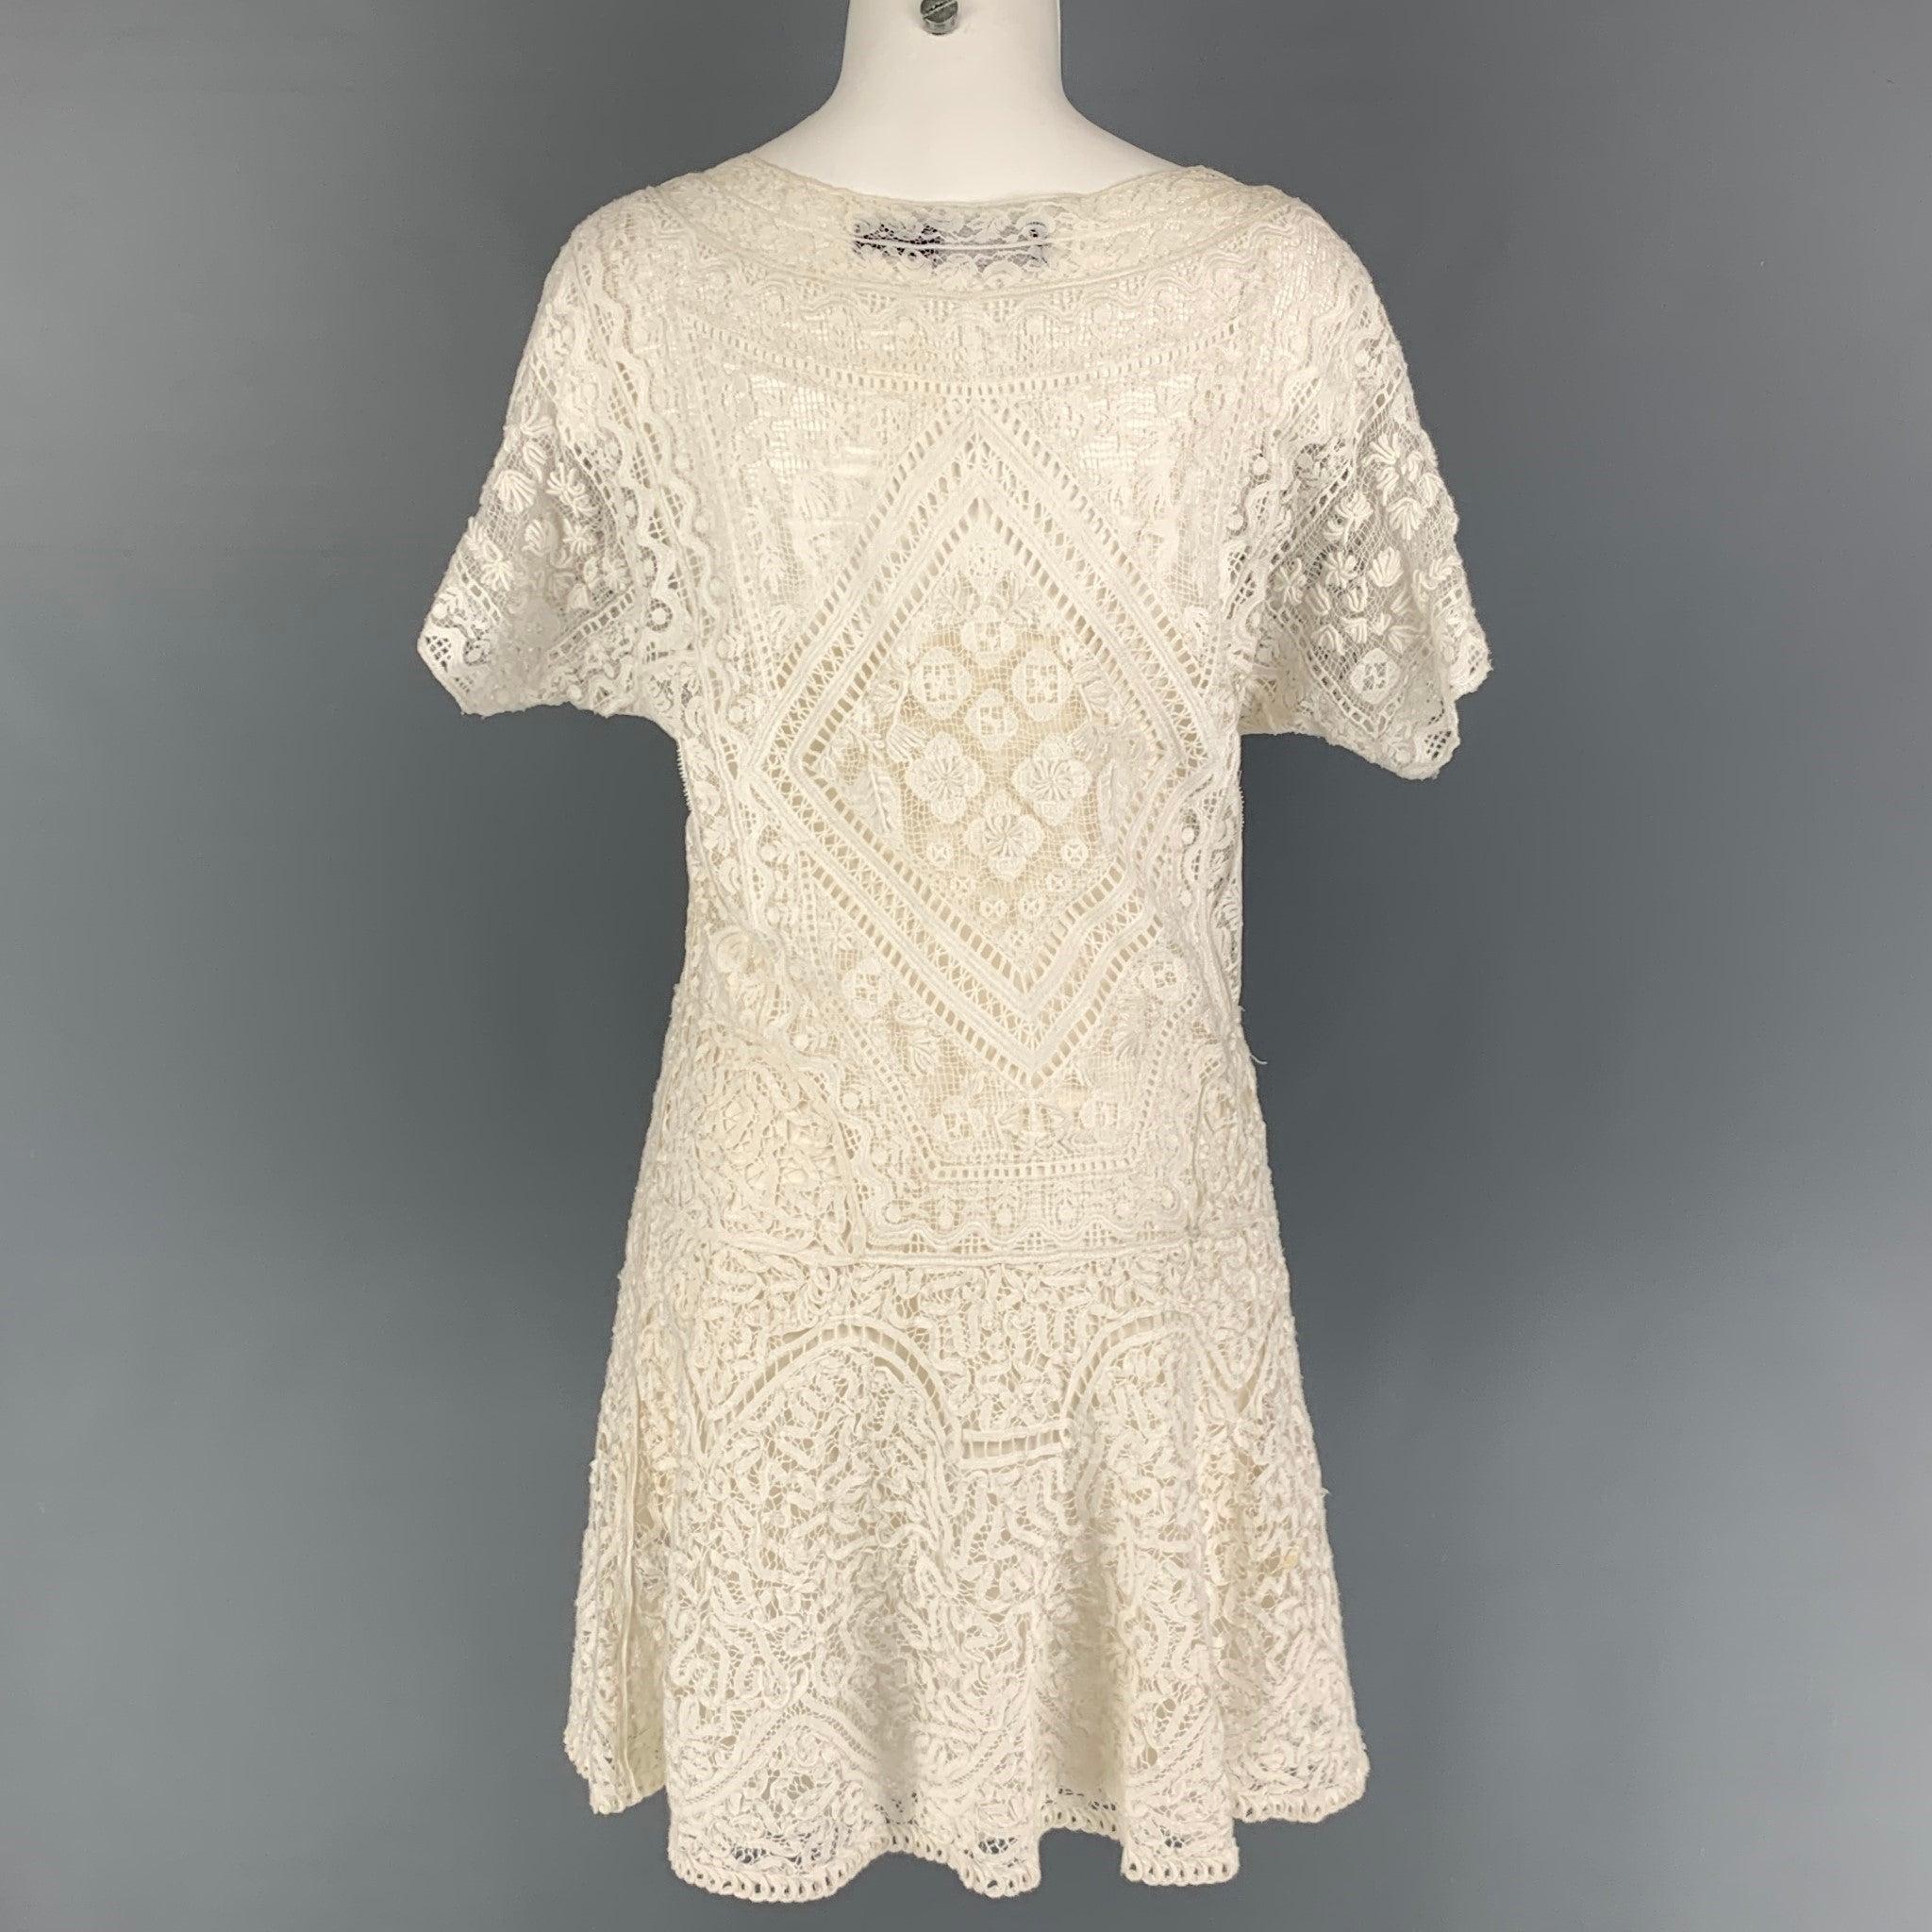 RALPH LAUREN Collection Size M White Cotton Crochet Short Dress In Good Condition For Sale In San Francisco, CA